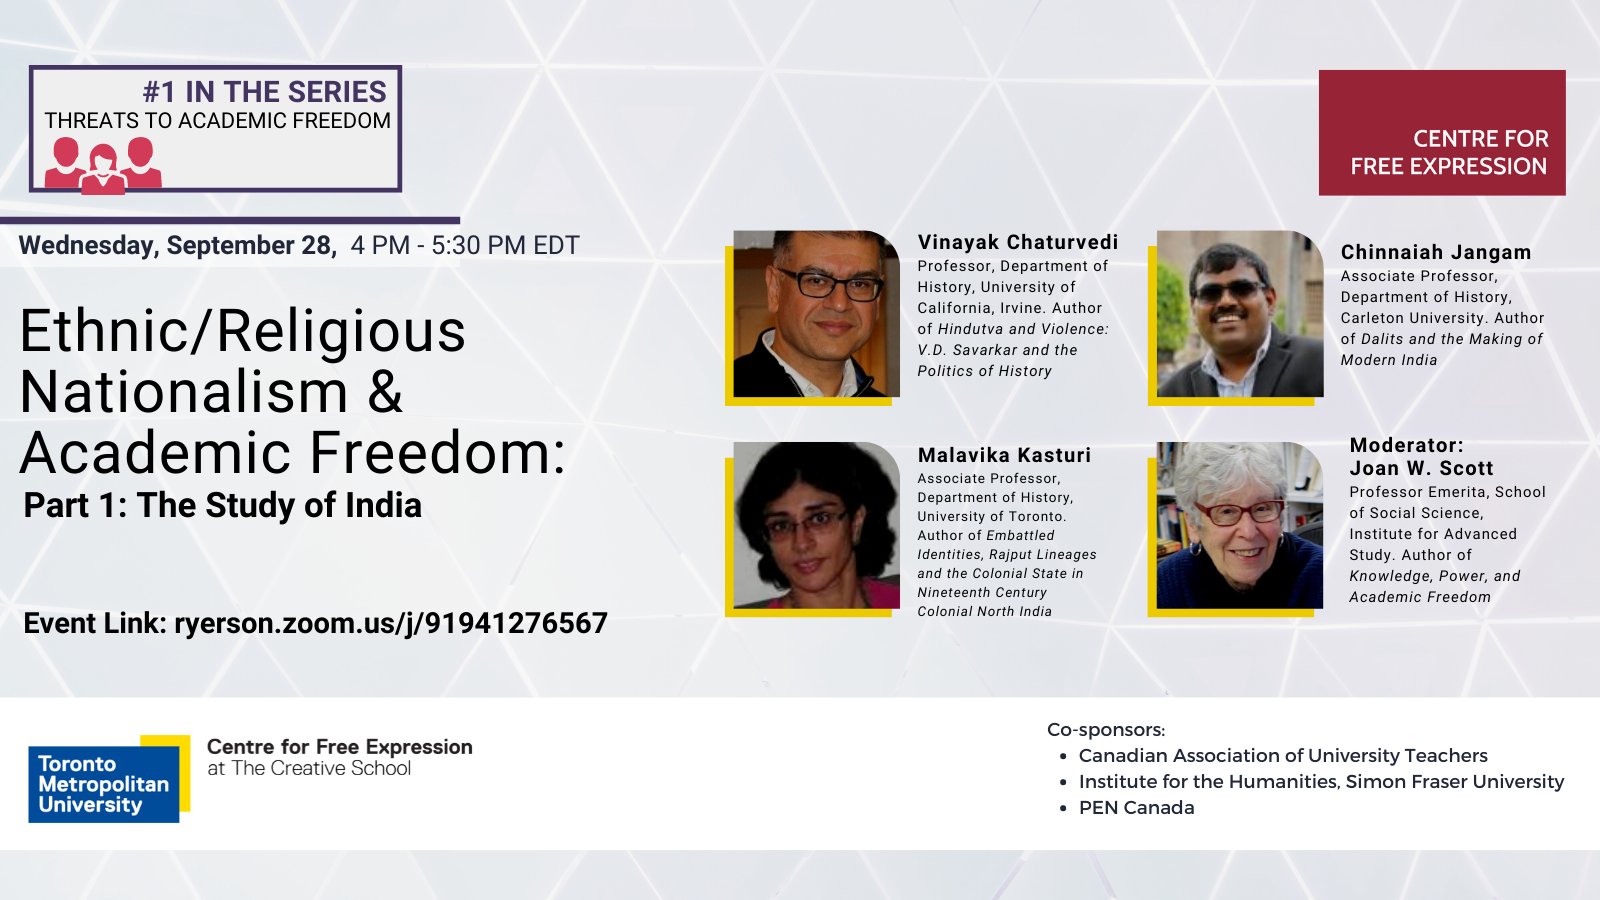 CFE Series: Threats to Academic Freedom - Part 1: The Study of India